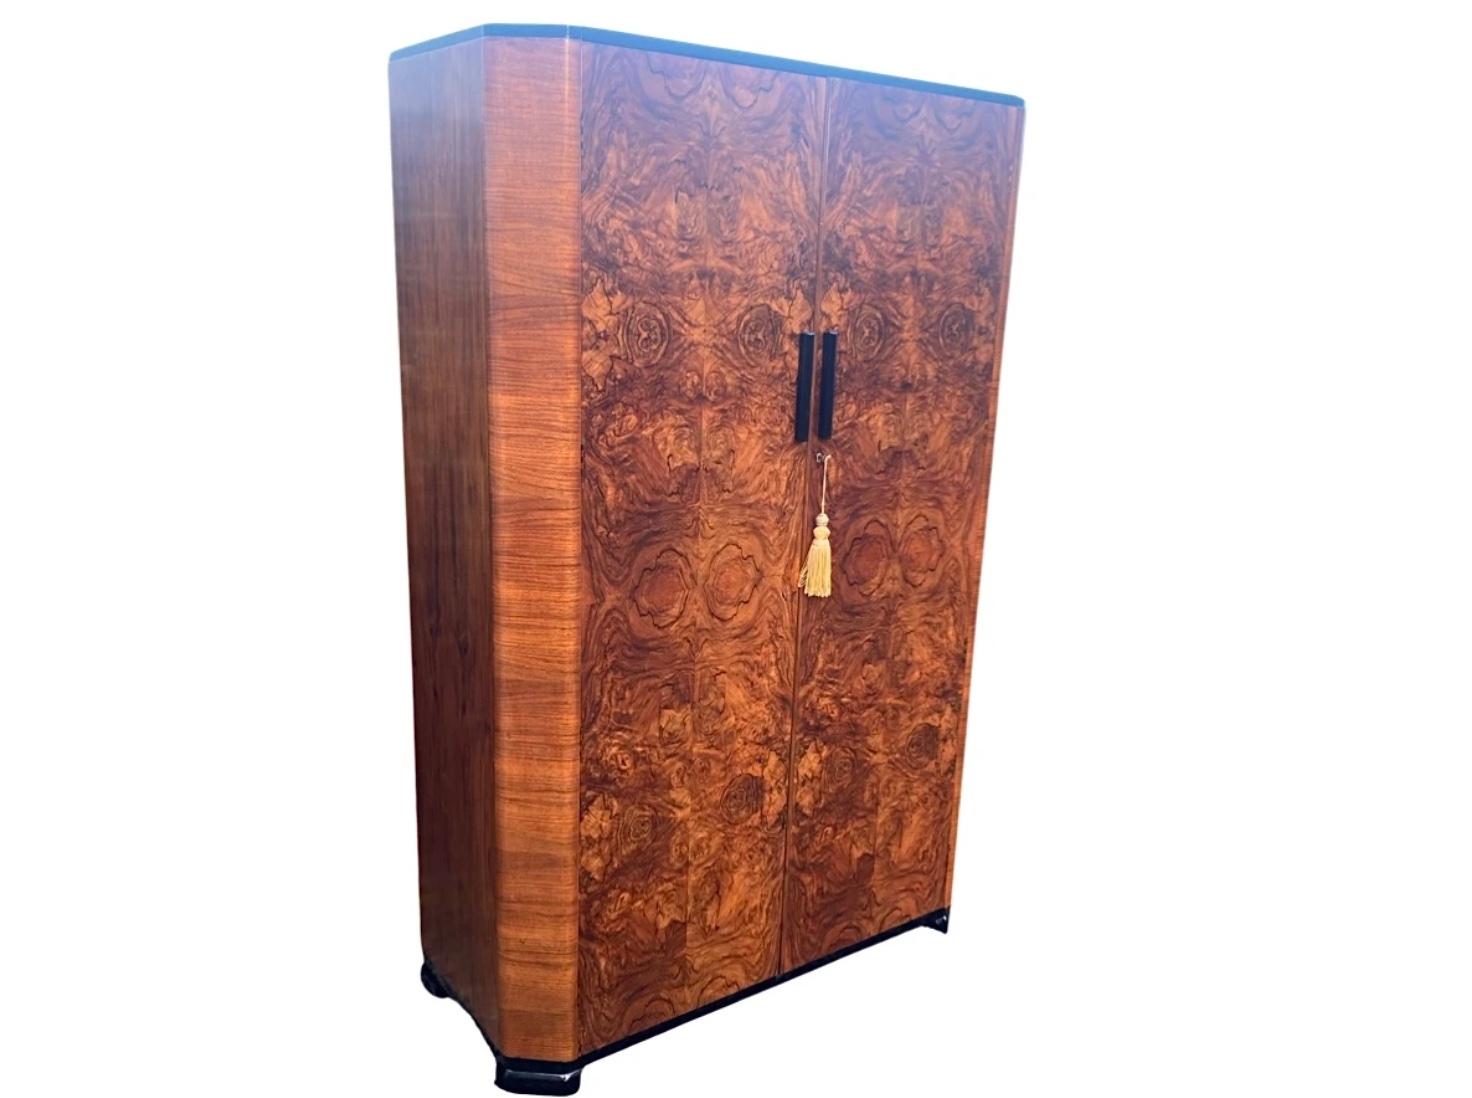 Here is an opportunity to acquire a wonderful burr walnut Art Deco wardrobe, in immaculate condition having recently been refurbished in our workshops. This wonderful example features 2 amazing burr walnut show wood doors flanked by broad canted